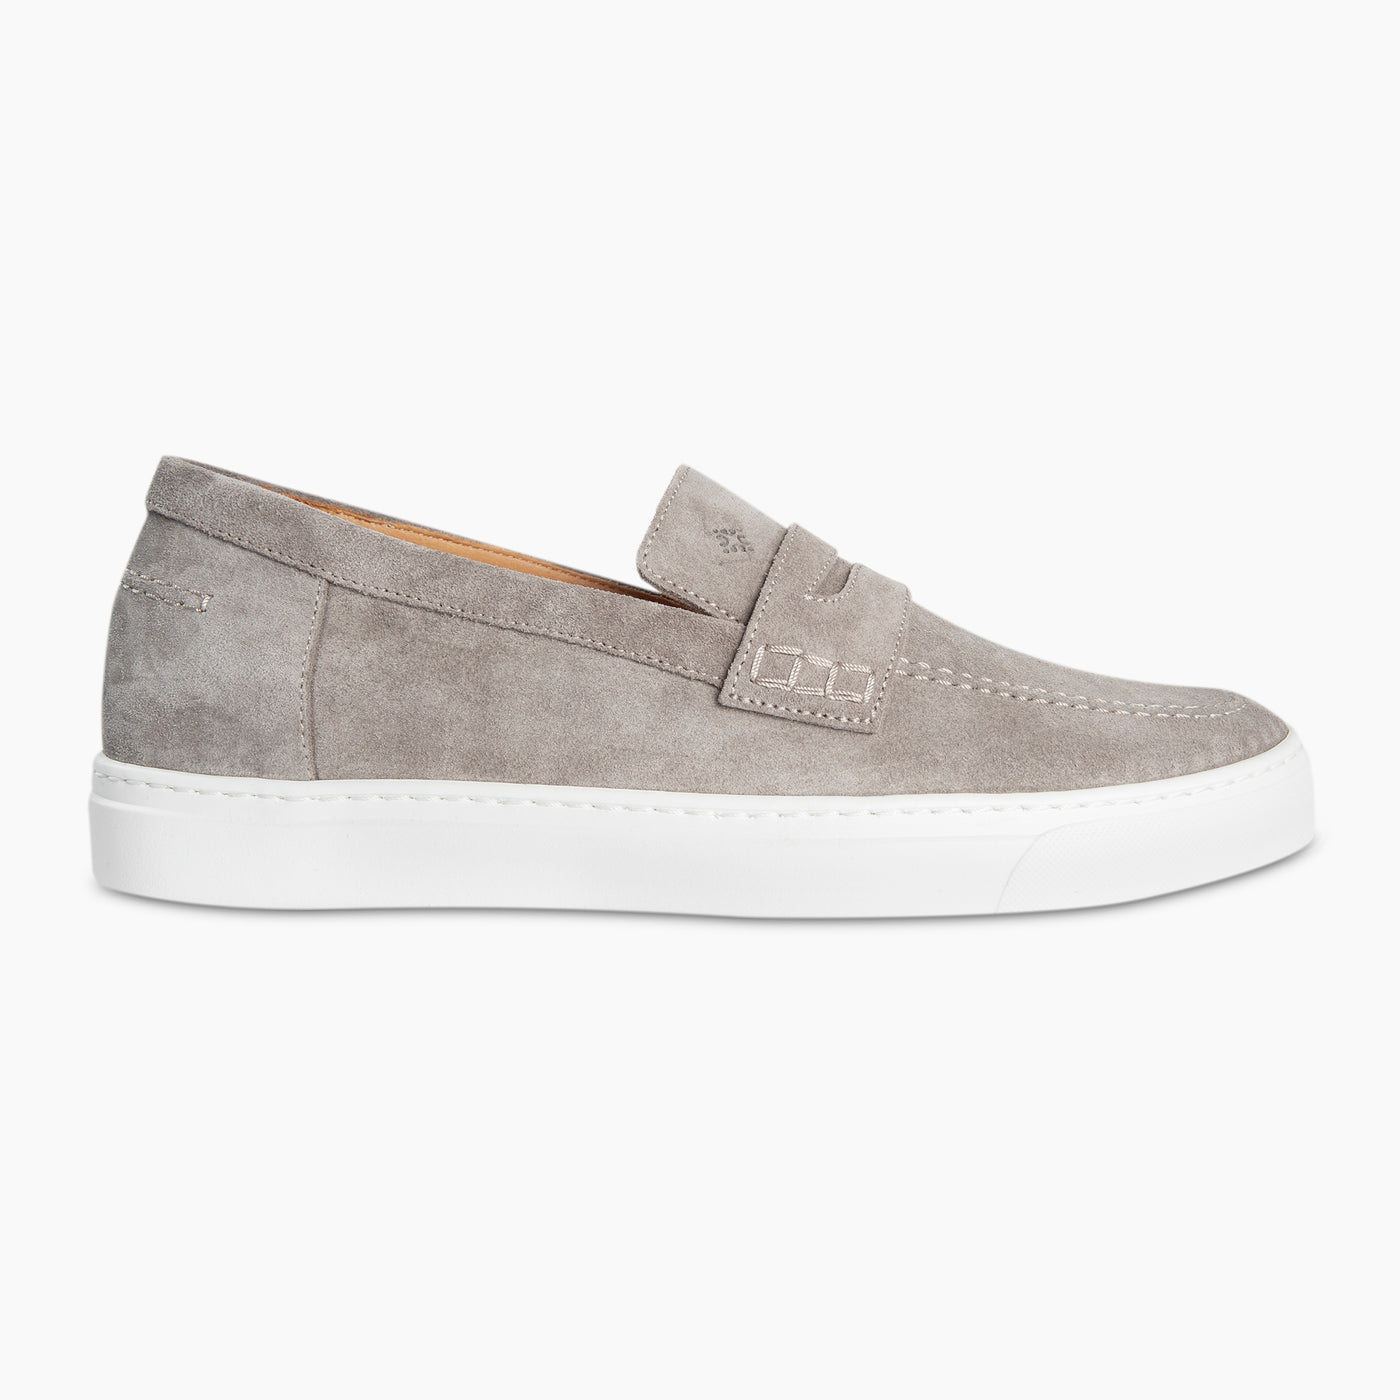 AND casual moccasins in suede and rubber sole